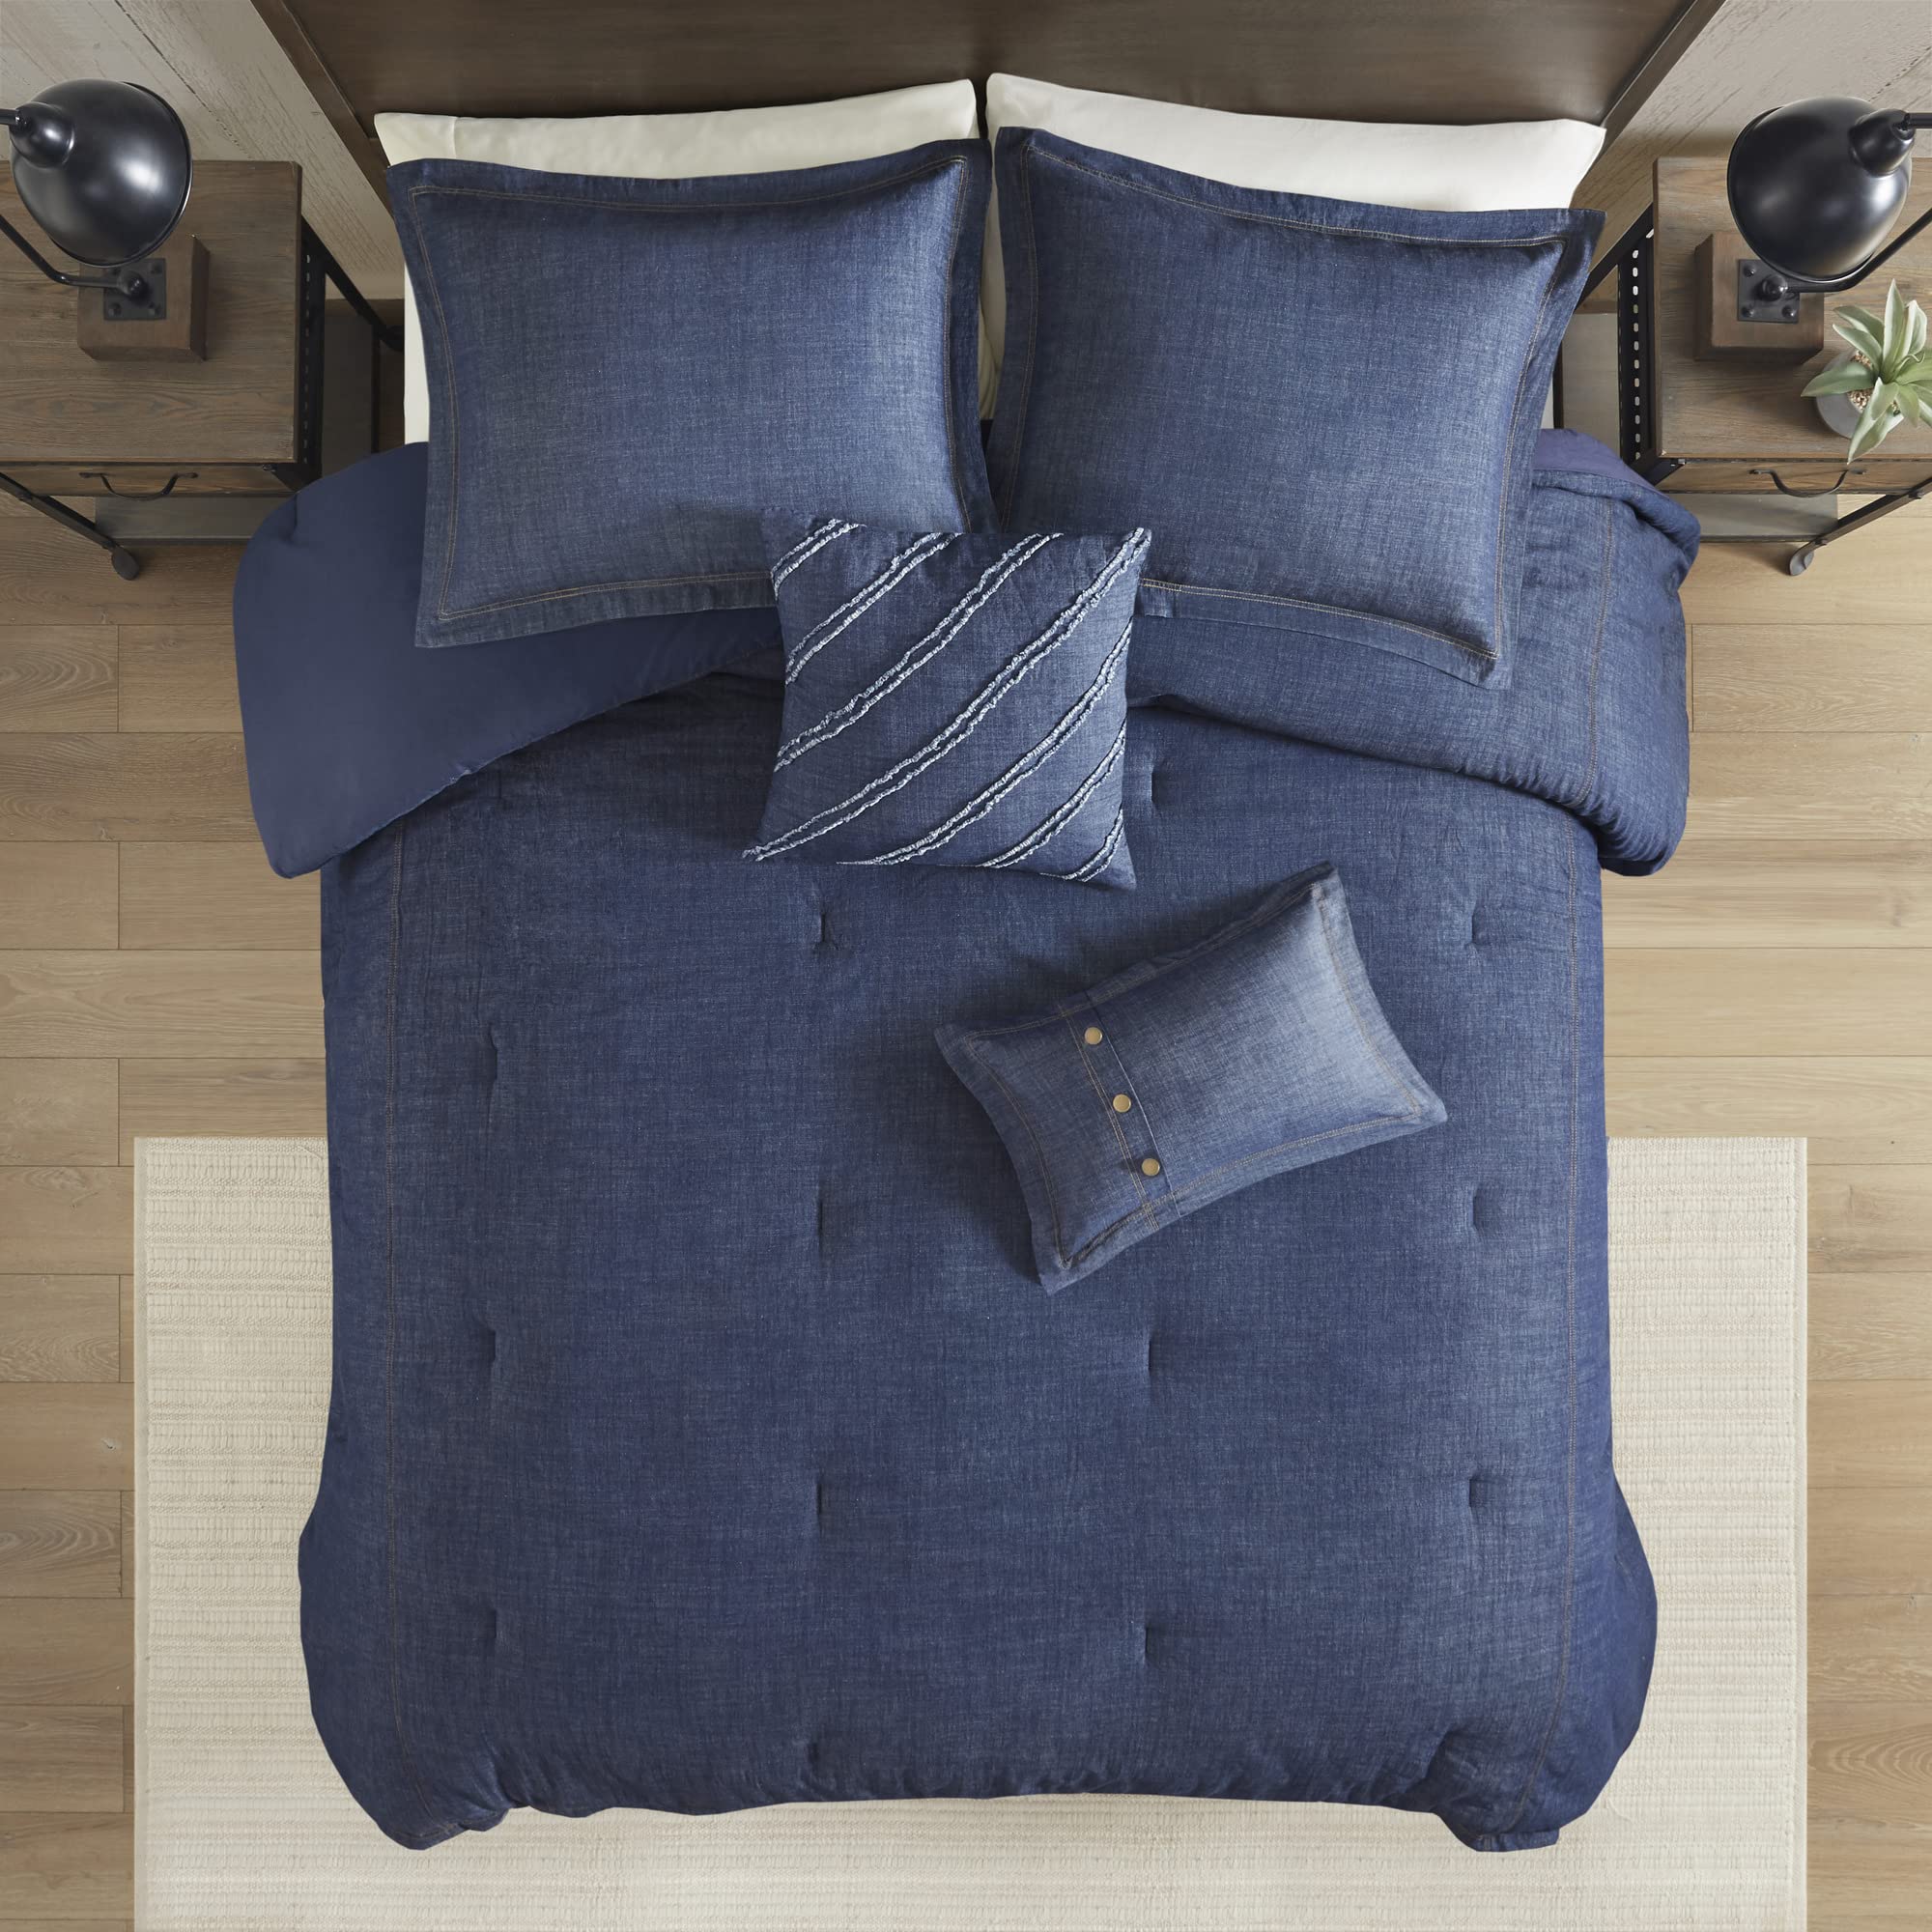 Woolrich Rustic Lodge Cabin Comforter Set - All Season Down Alternative Warm Bedding Layer and Matching Shams, Oversized King, Perry, Denim Blue